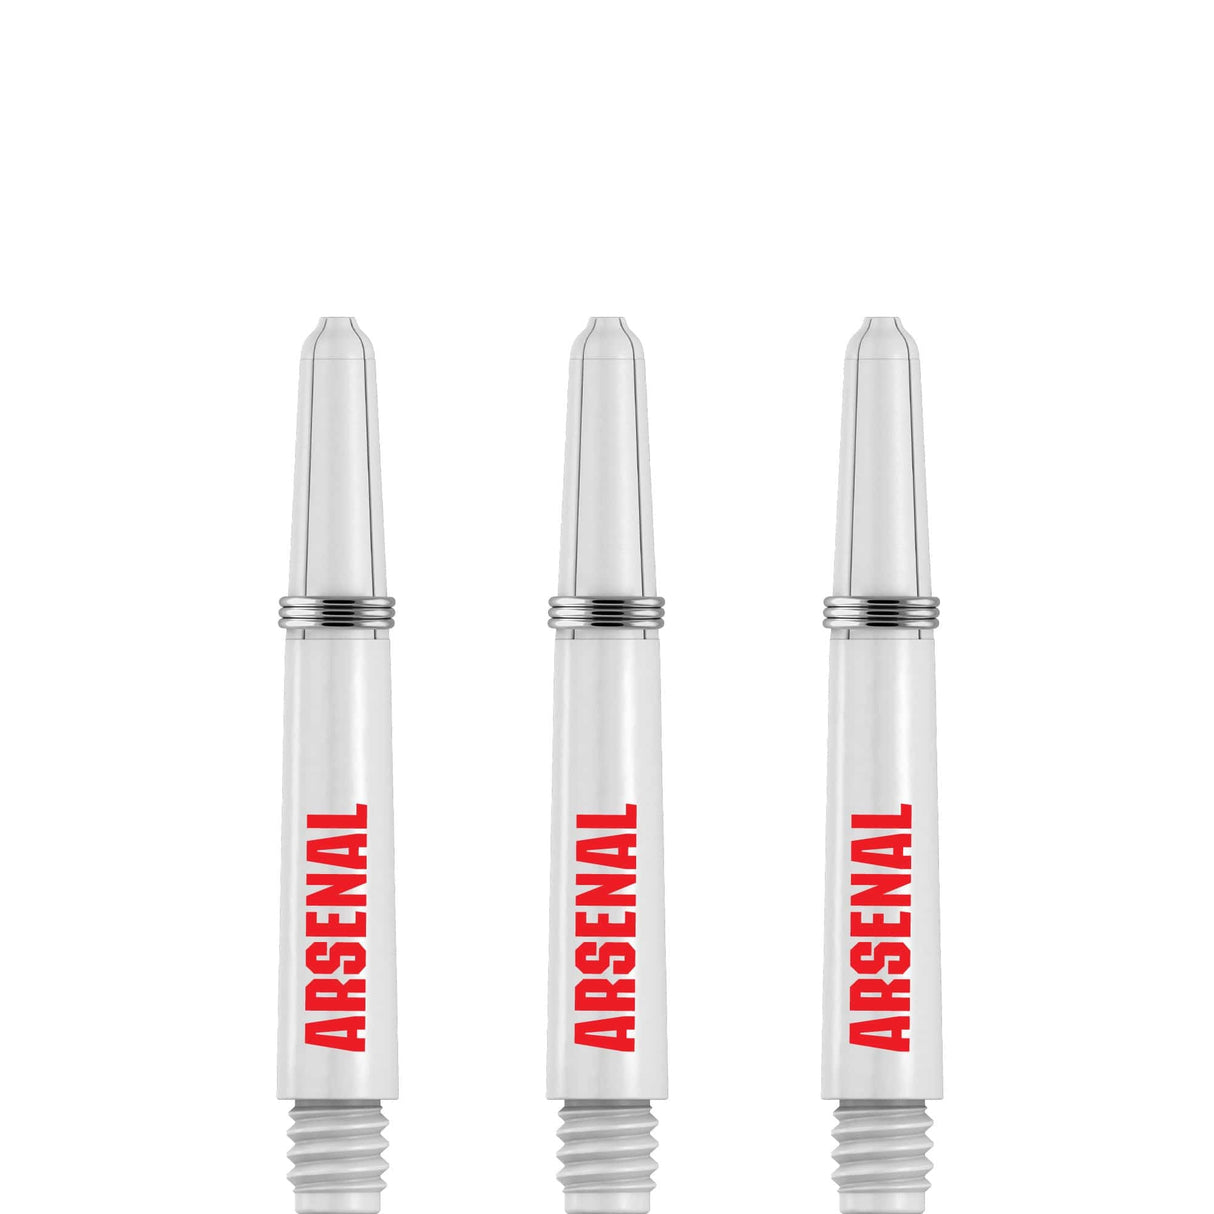 Arsenal FC Dart Shafts - Official Licensed - Dart Stems with Springs - The Gunners - White Short